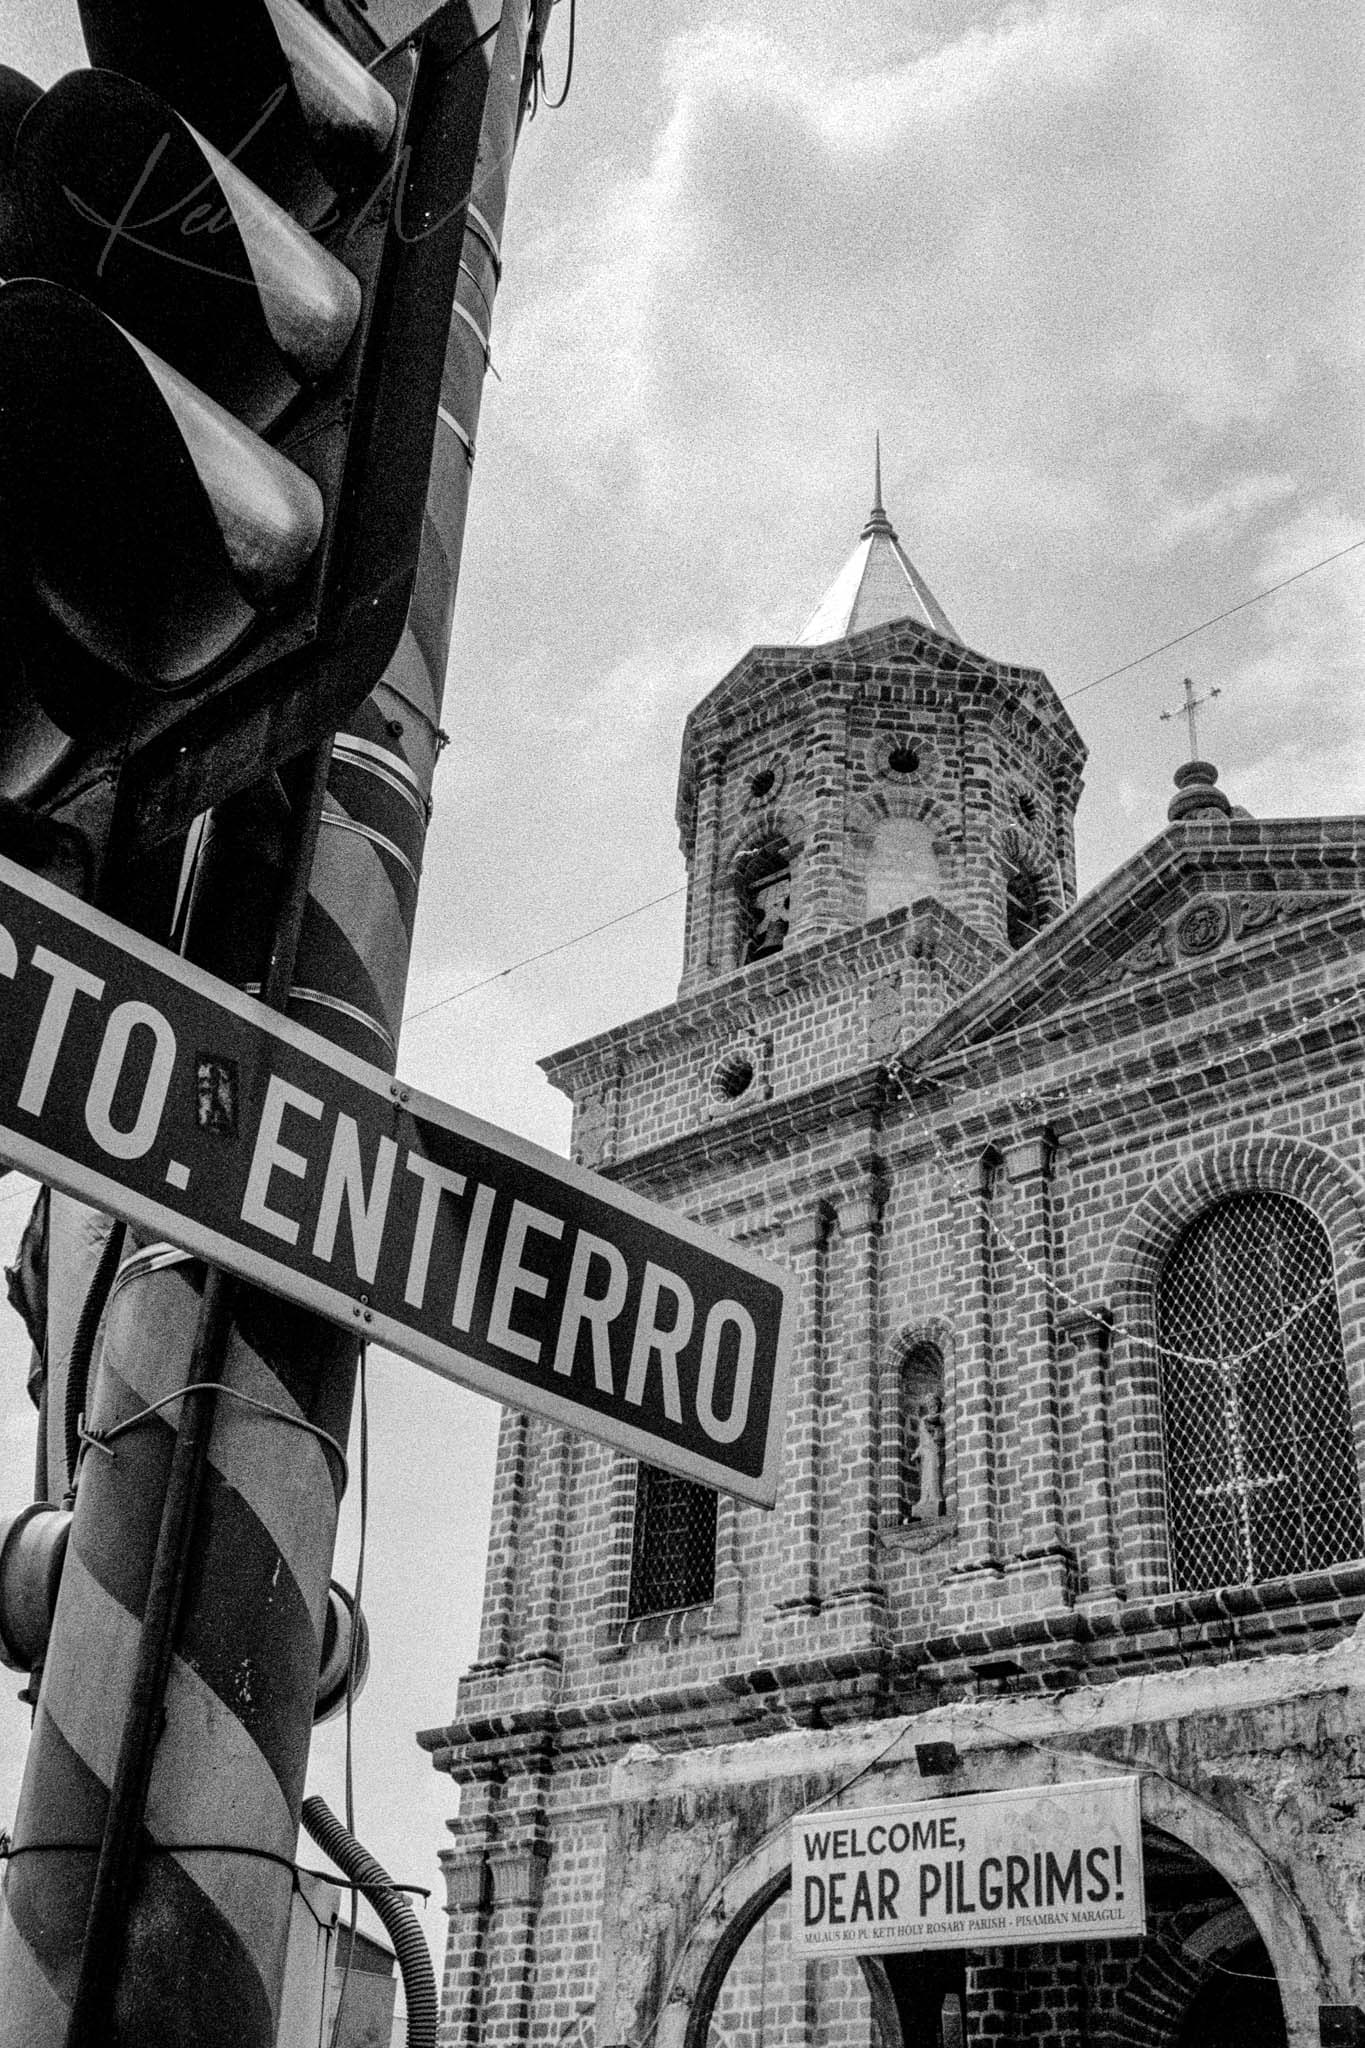 Monumental Gothic Church and Pilgrimage Signage in Philippines in Black and White Photography